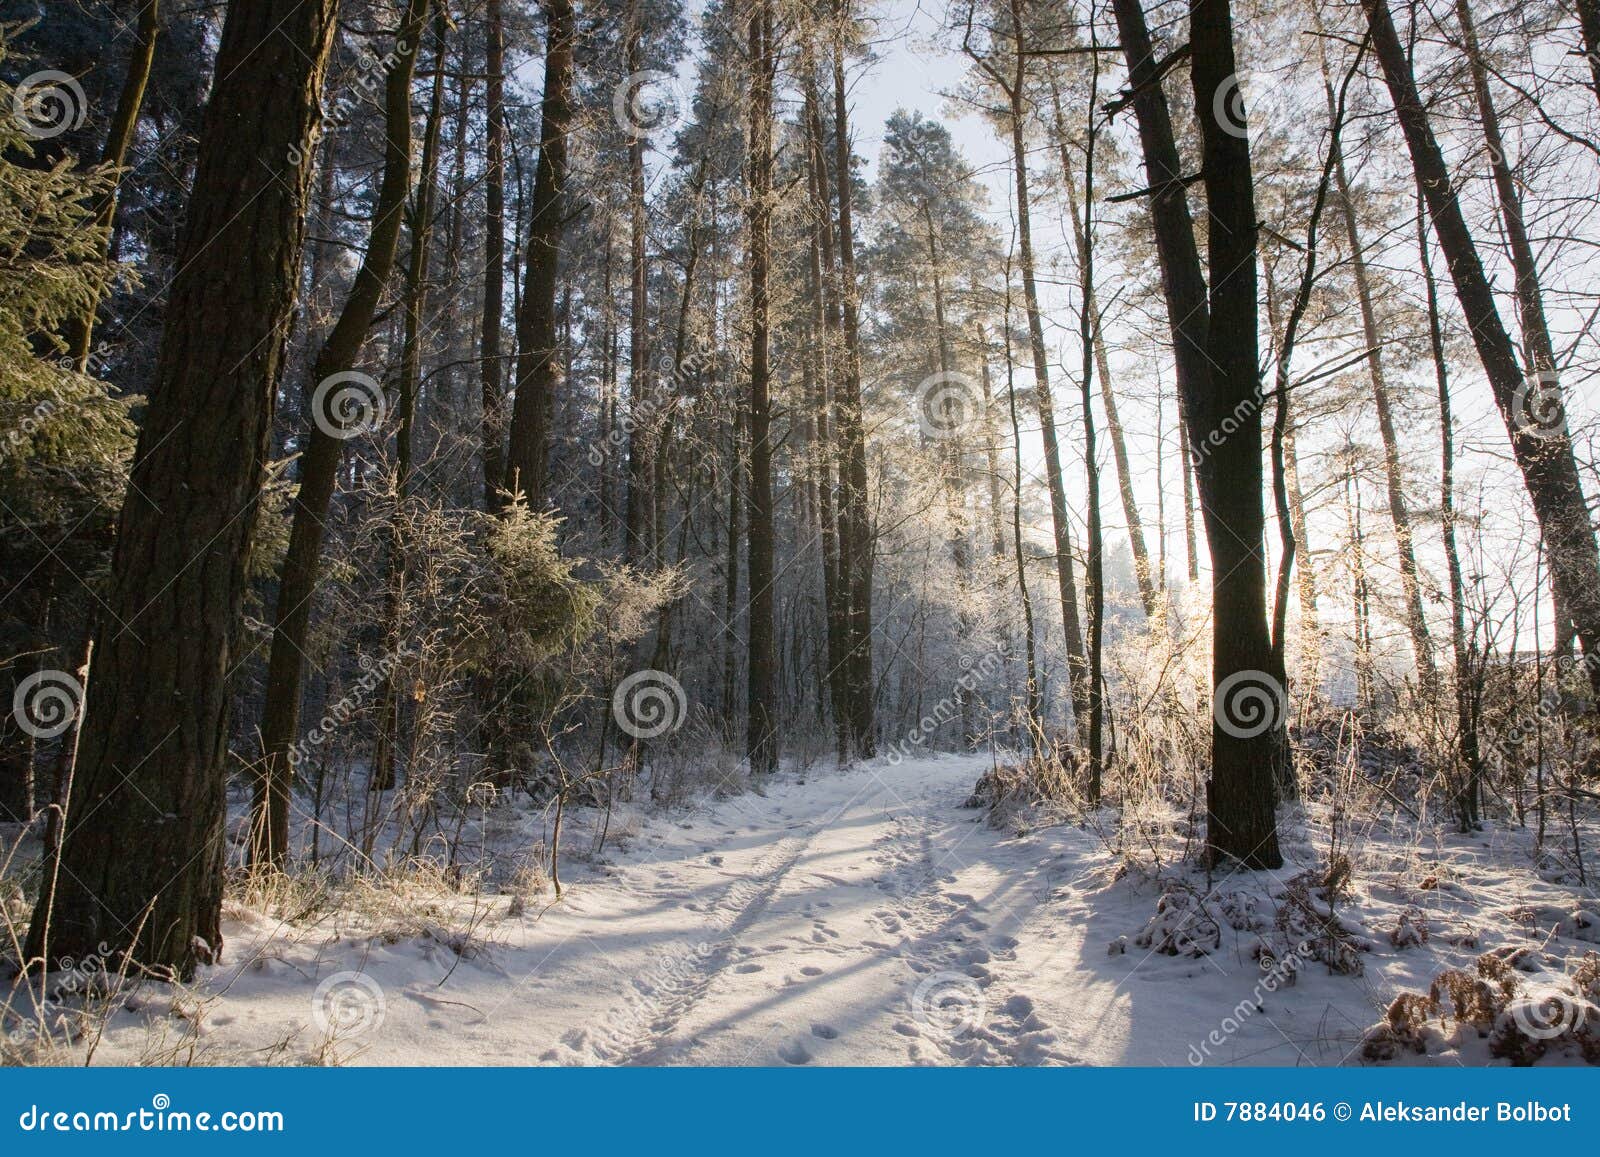 ground road with track by snowy wintertime forest